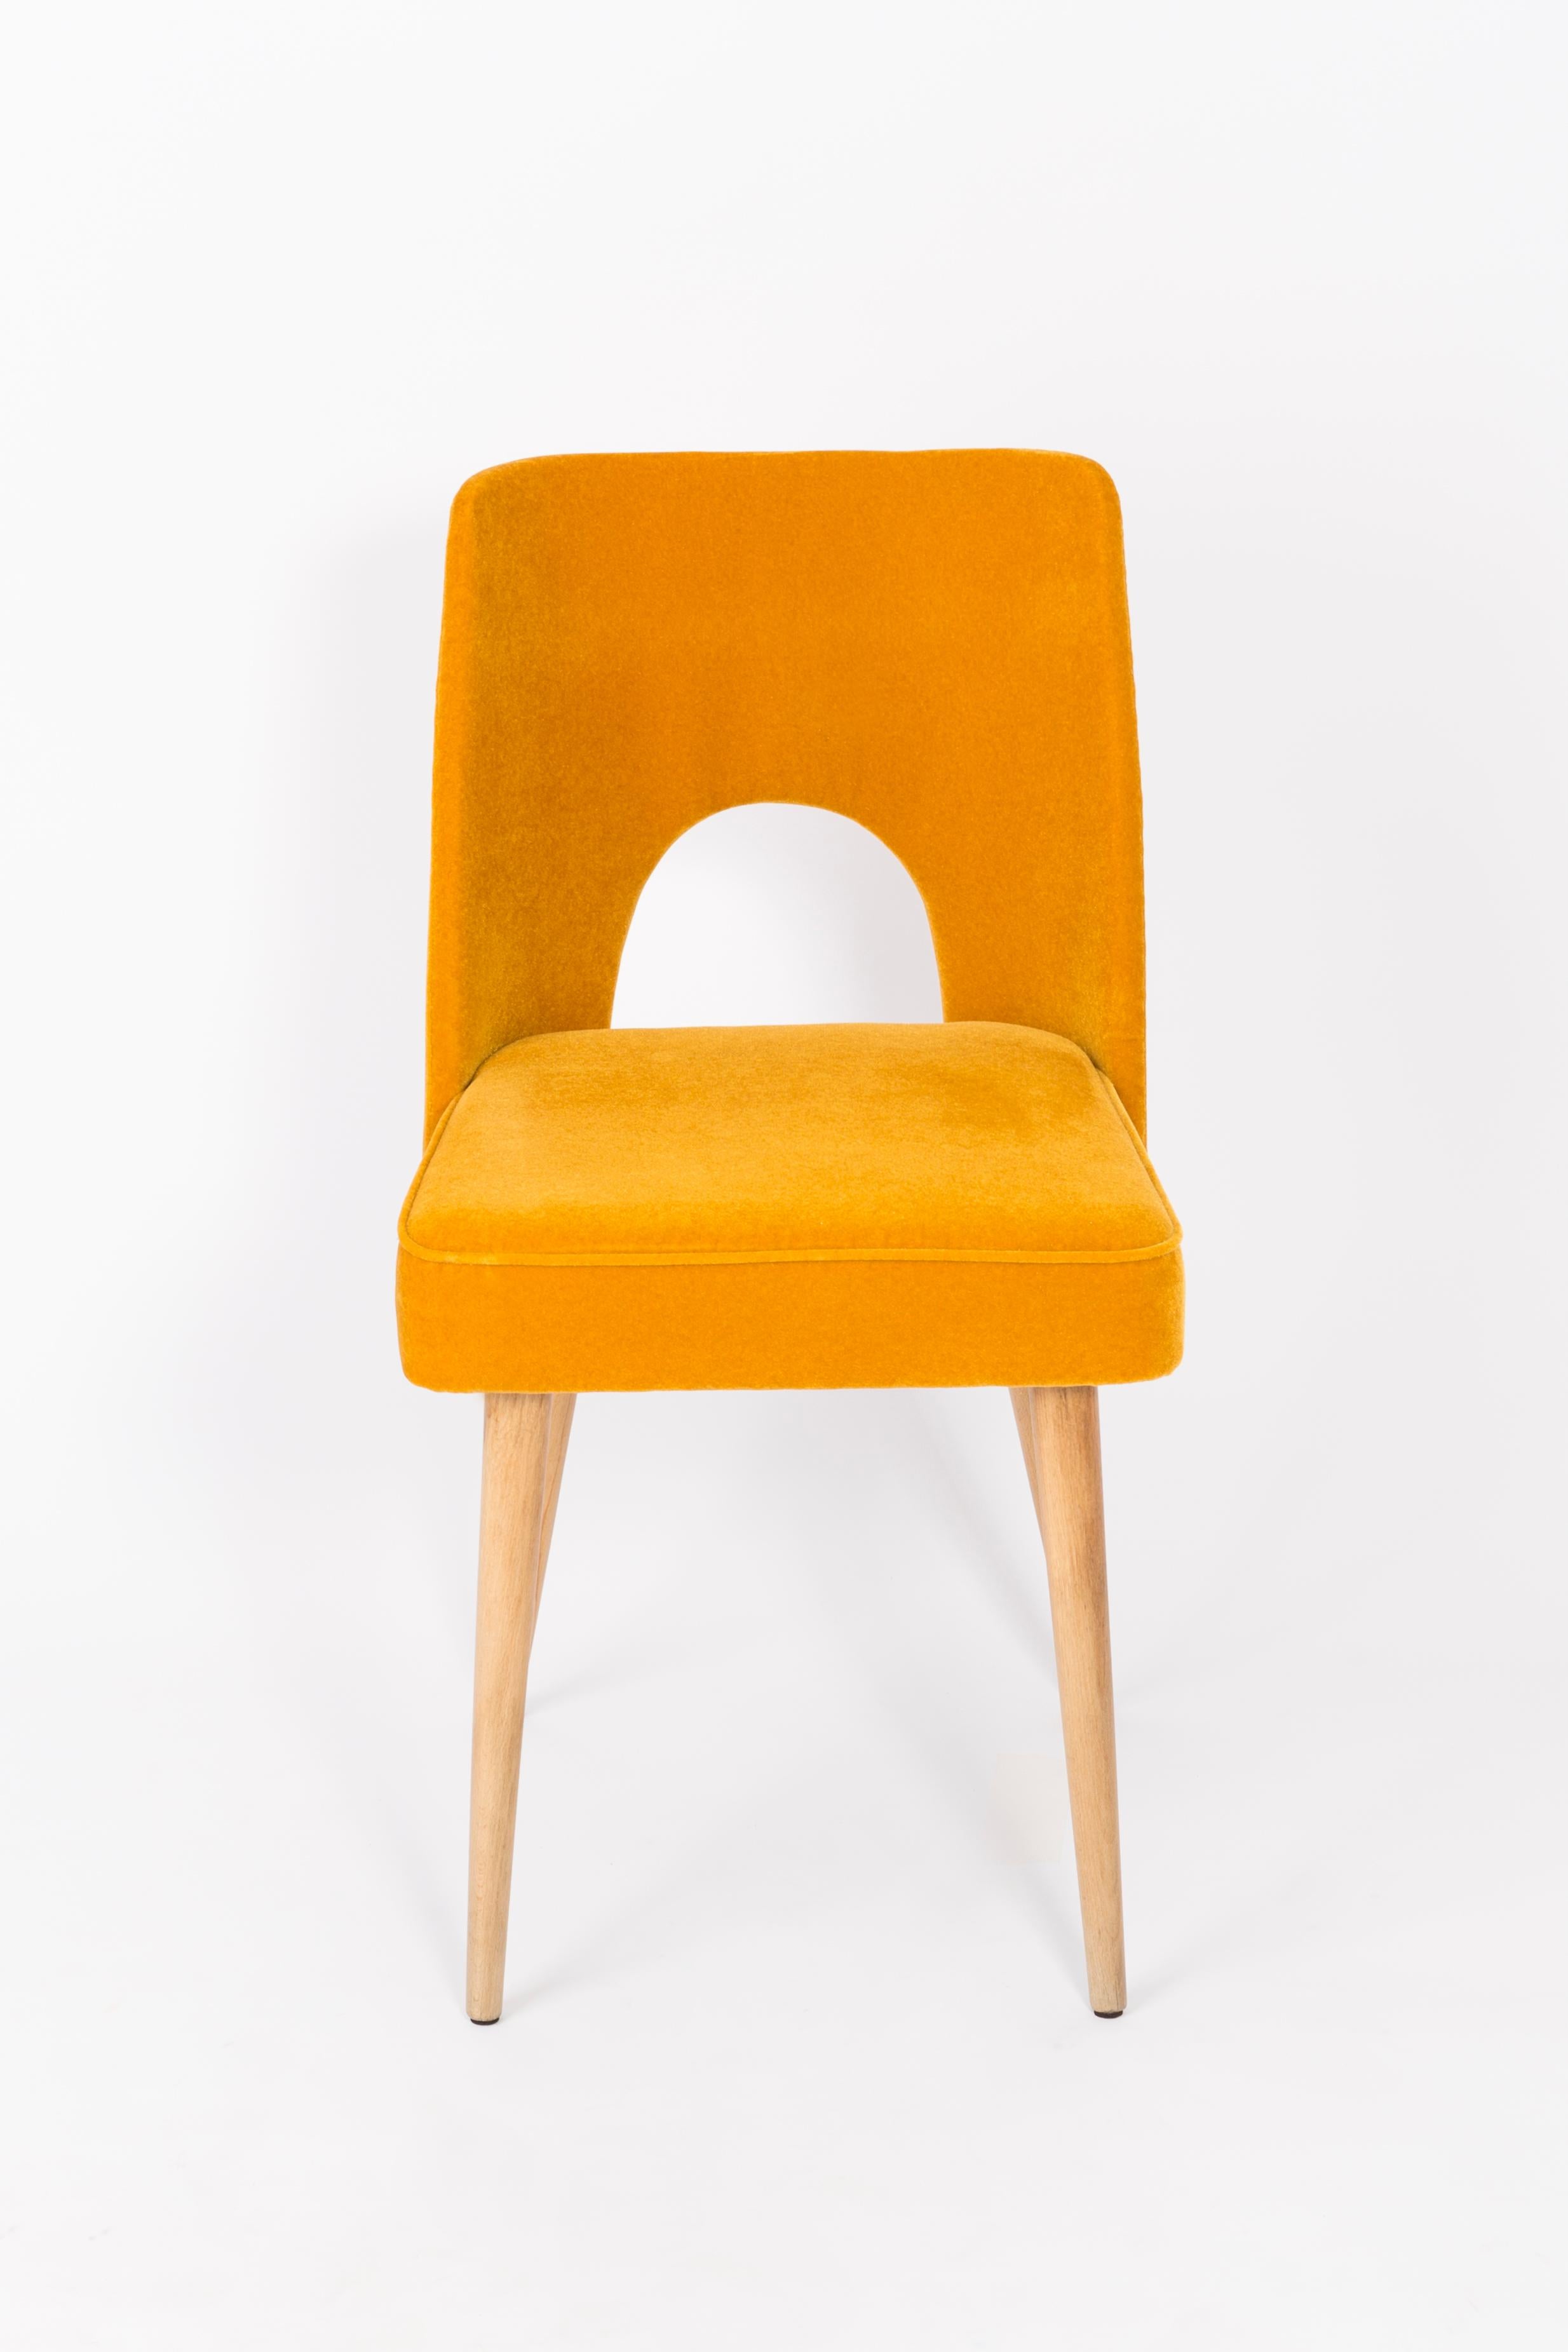 Set of Four Mustard Yellow Velvet 'Shell' Chairs, 1960s For Sale 7